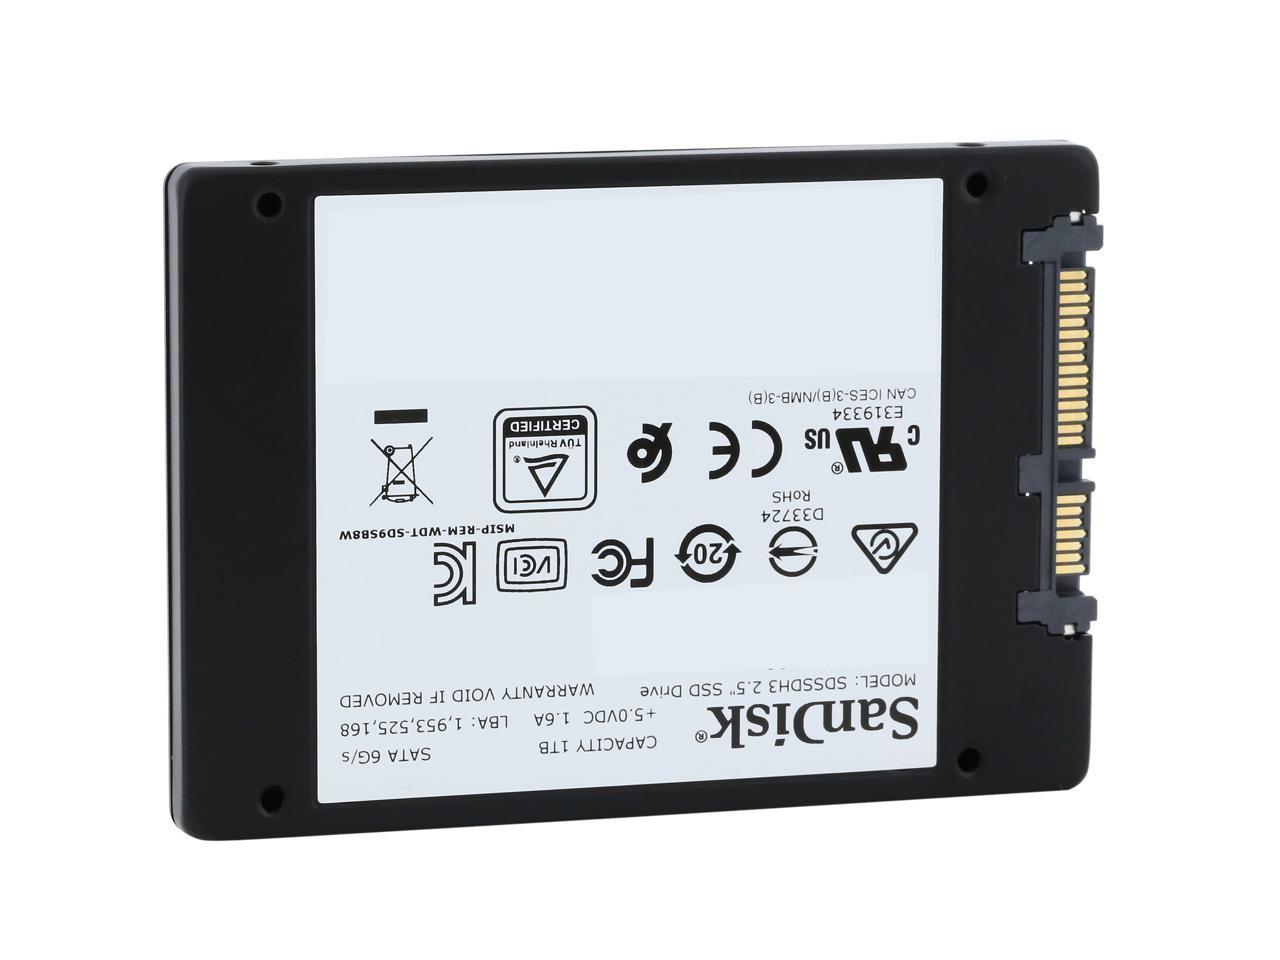 Sandisk 1TB Ultra 2.5" SATA III 560MB/s Read 530MB/s Write Solid State Drive ct 